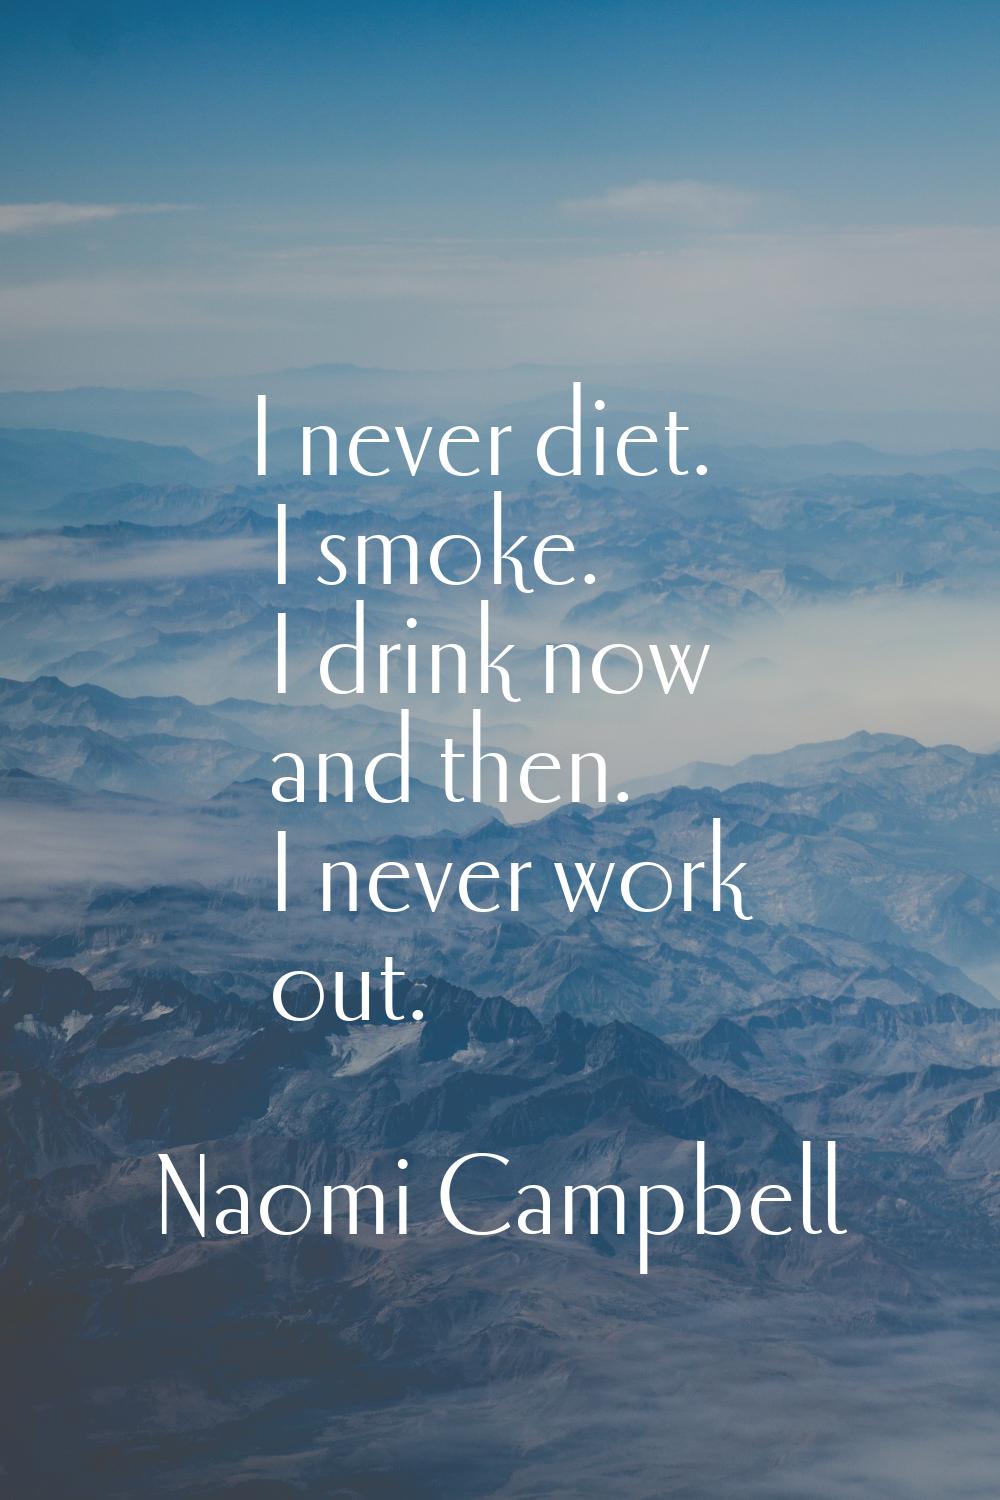 I never diet. I smoke. I drink now and then. I never work out.